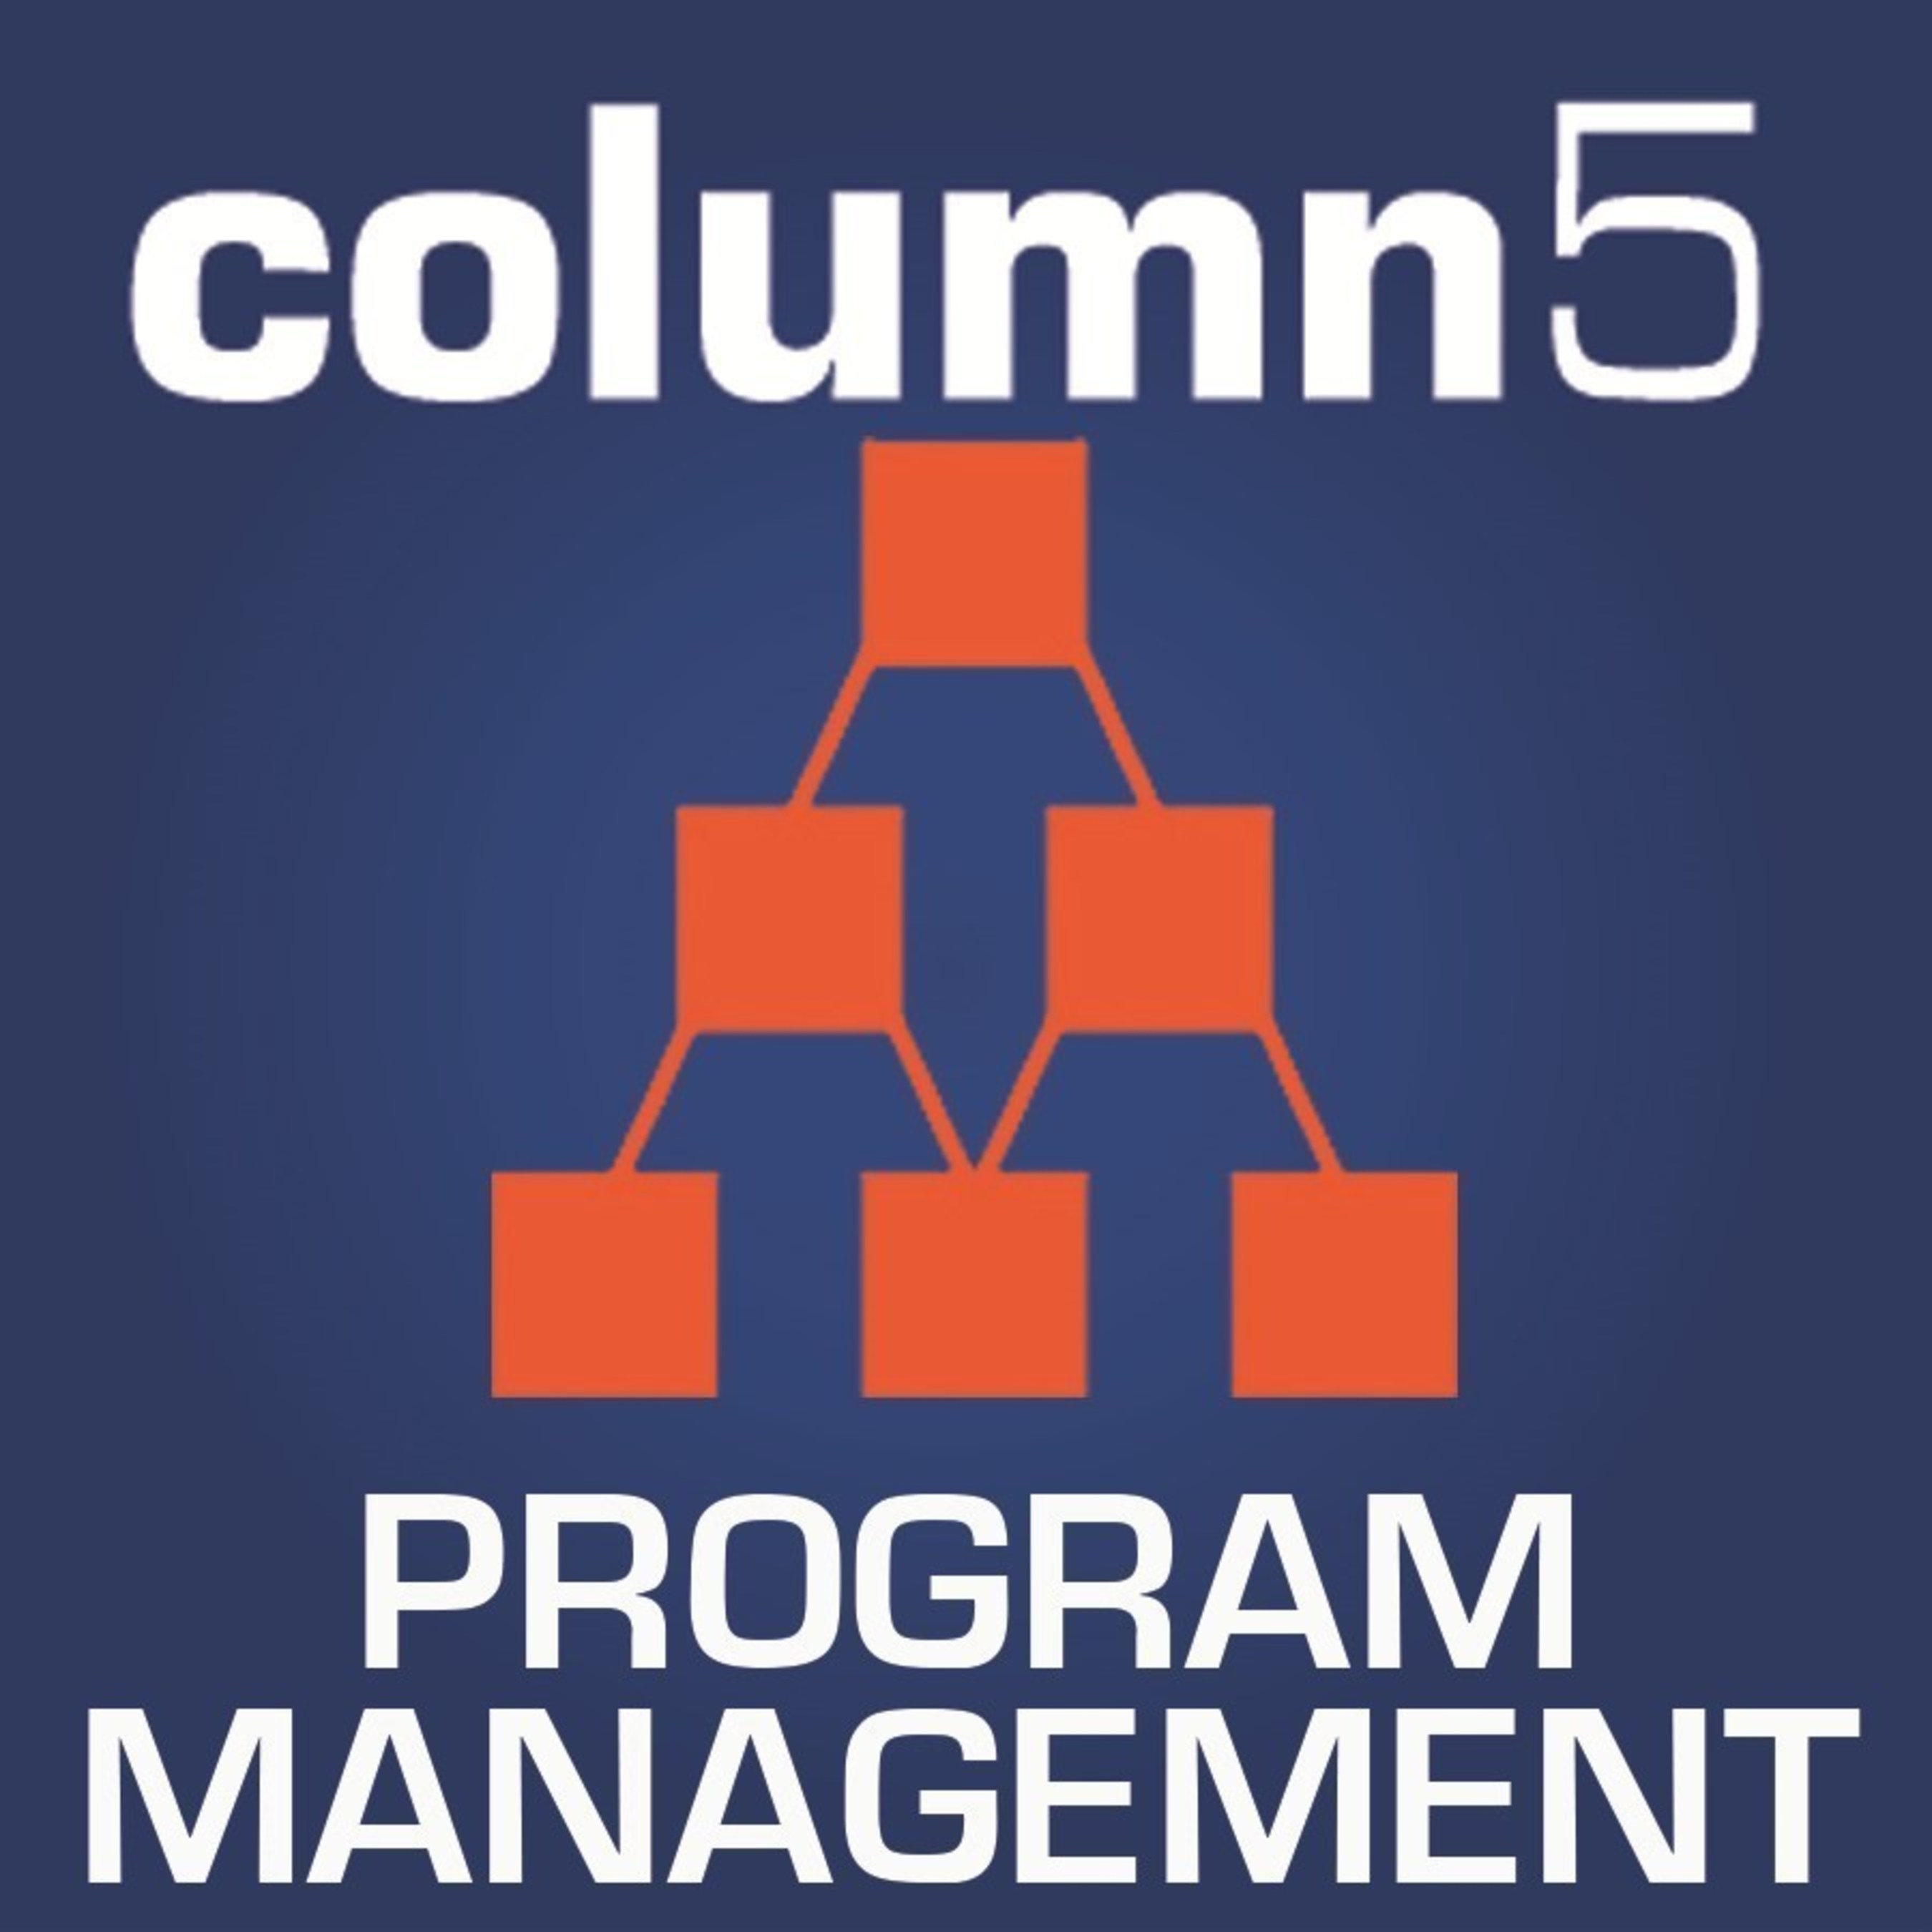 Column5 Consulting, an SAP partner, today announced that it has received accreditation for a global partner quality program by SAP SE for the 5th consecutive year.